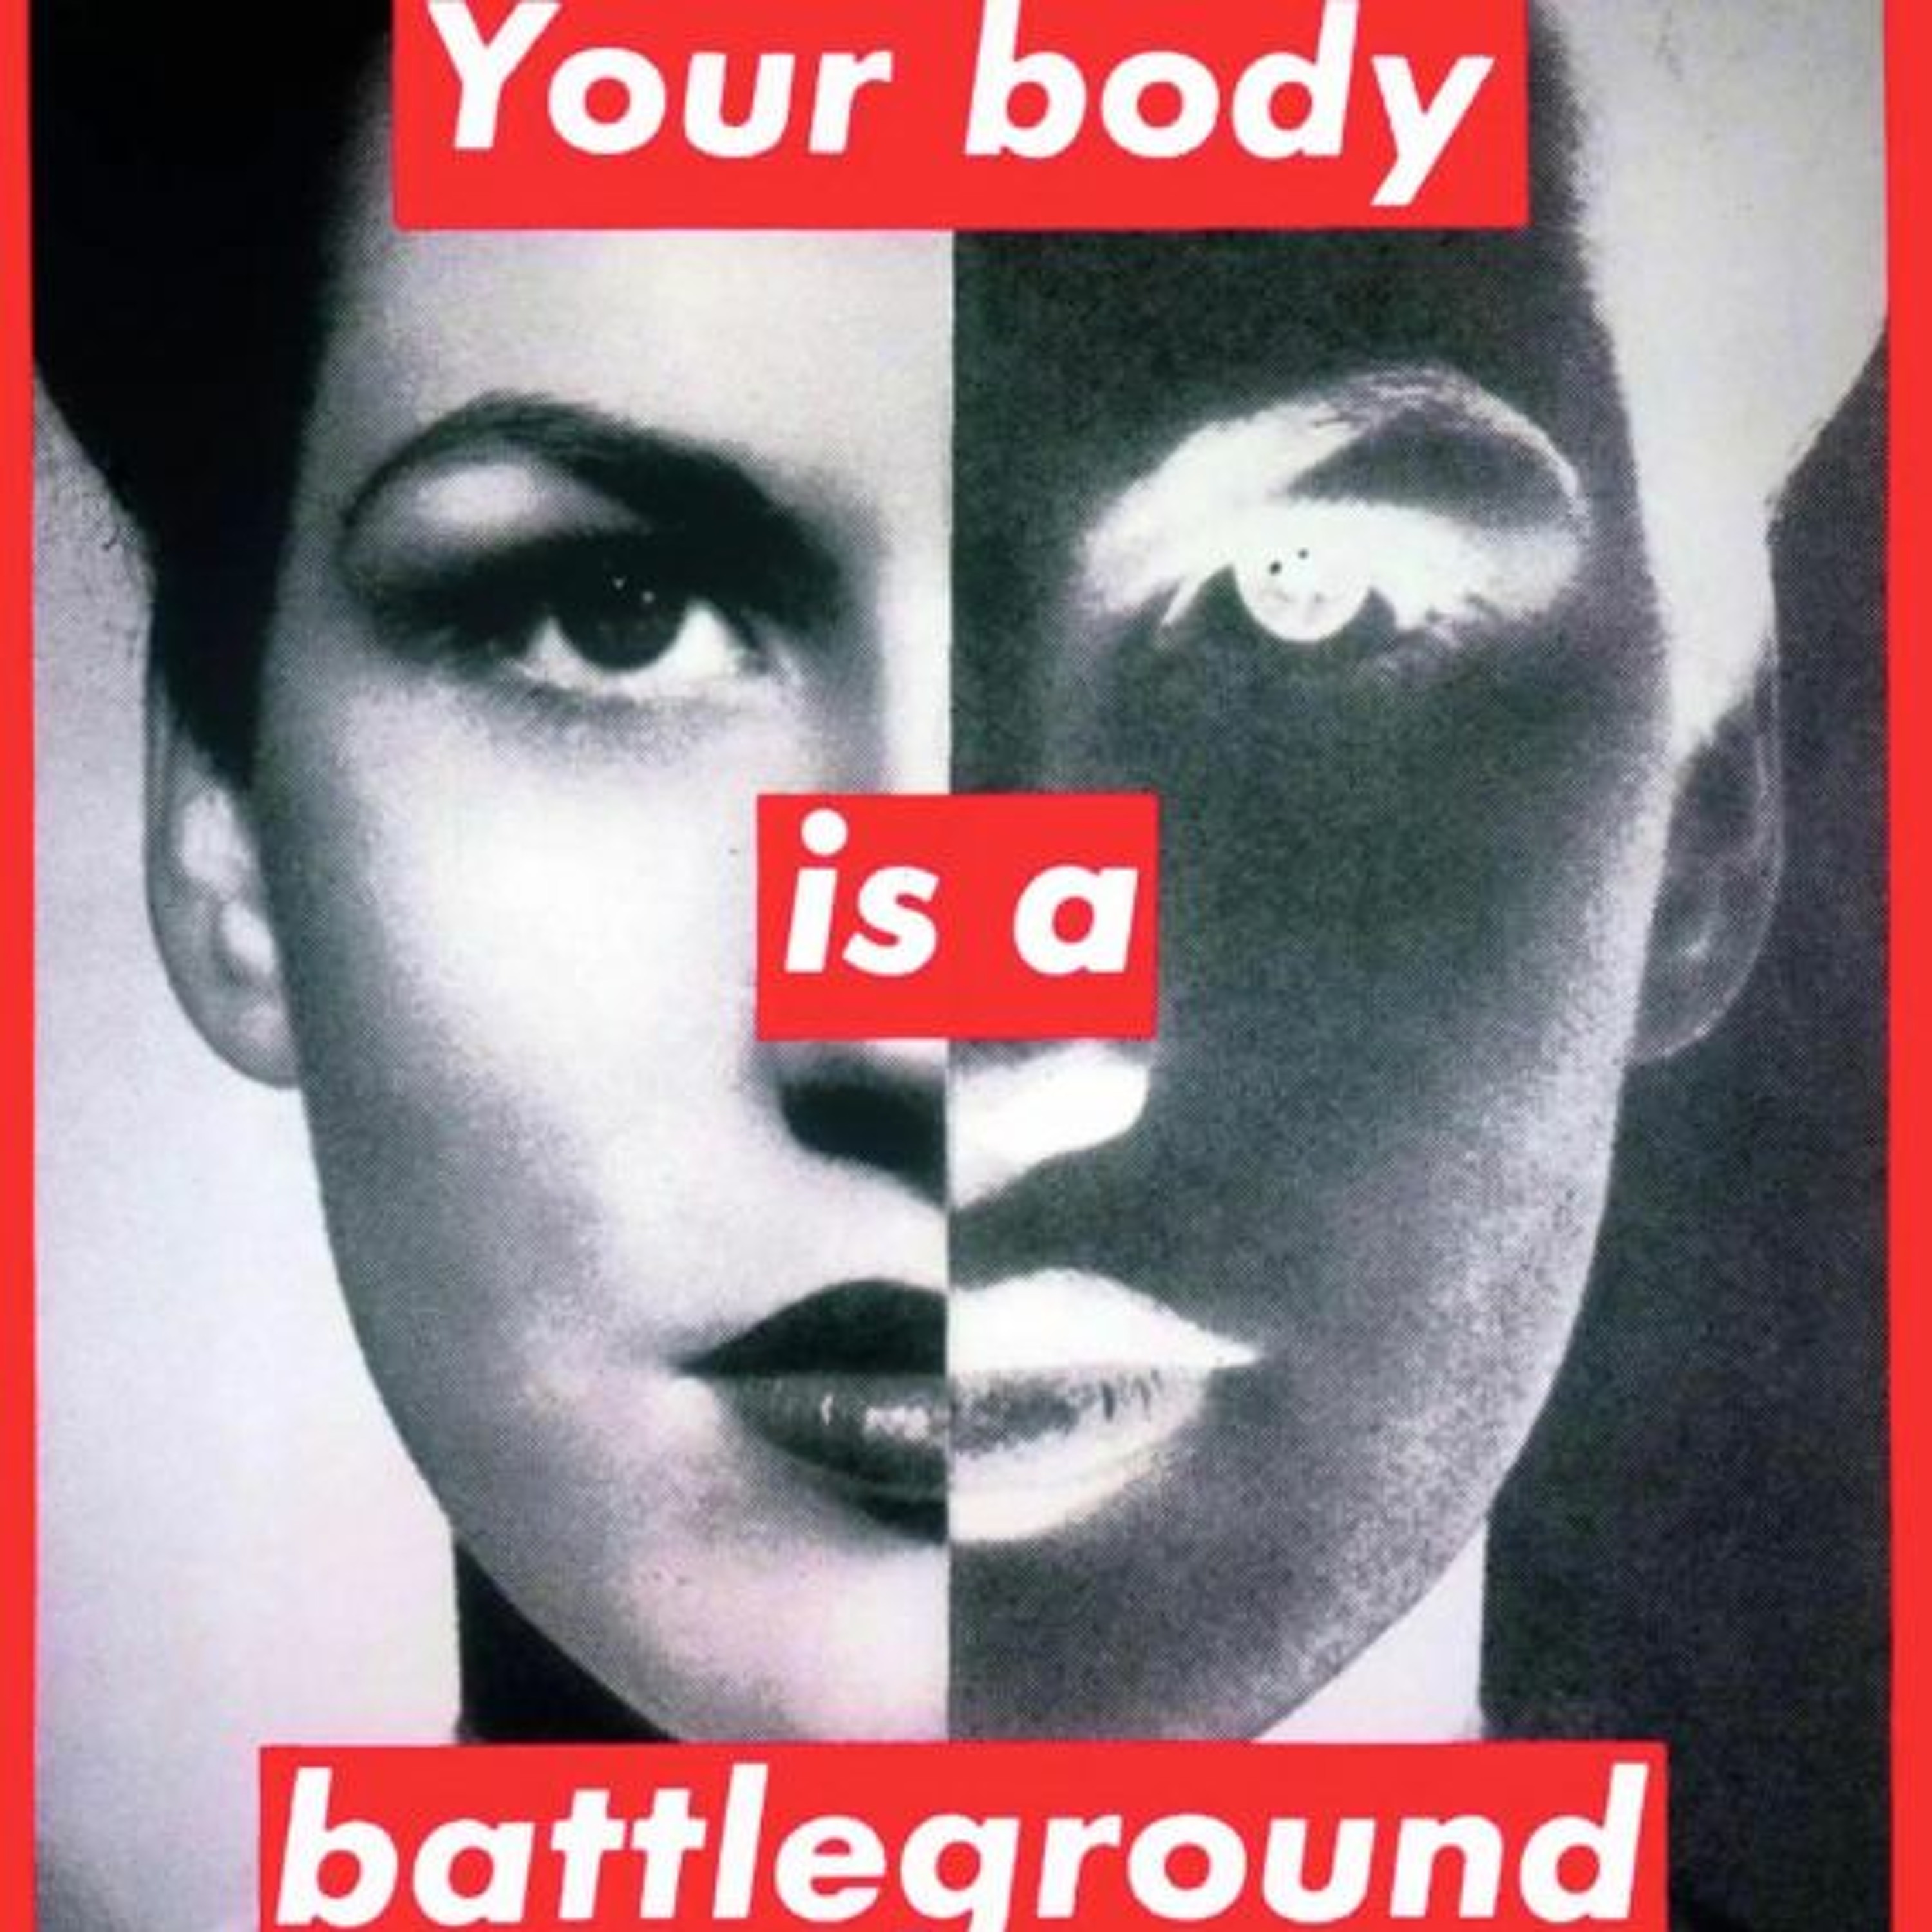 Ep. 64 - Barbara Kruger’s ”Untitled (Your Body is a Battleground)” (1989)